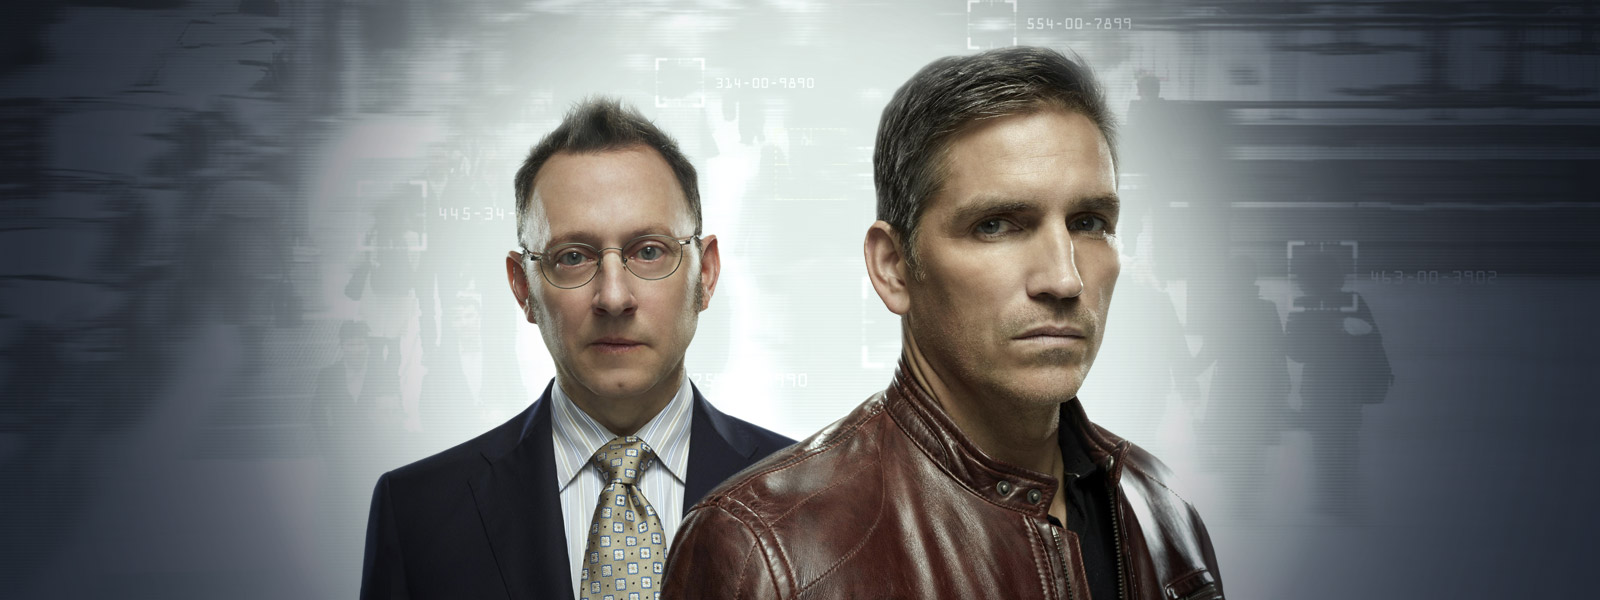 Review: Person of Interest – 4.11 “If-Then-Else”